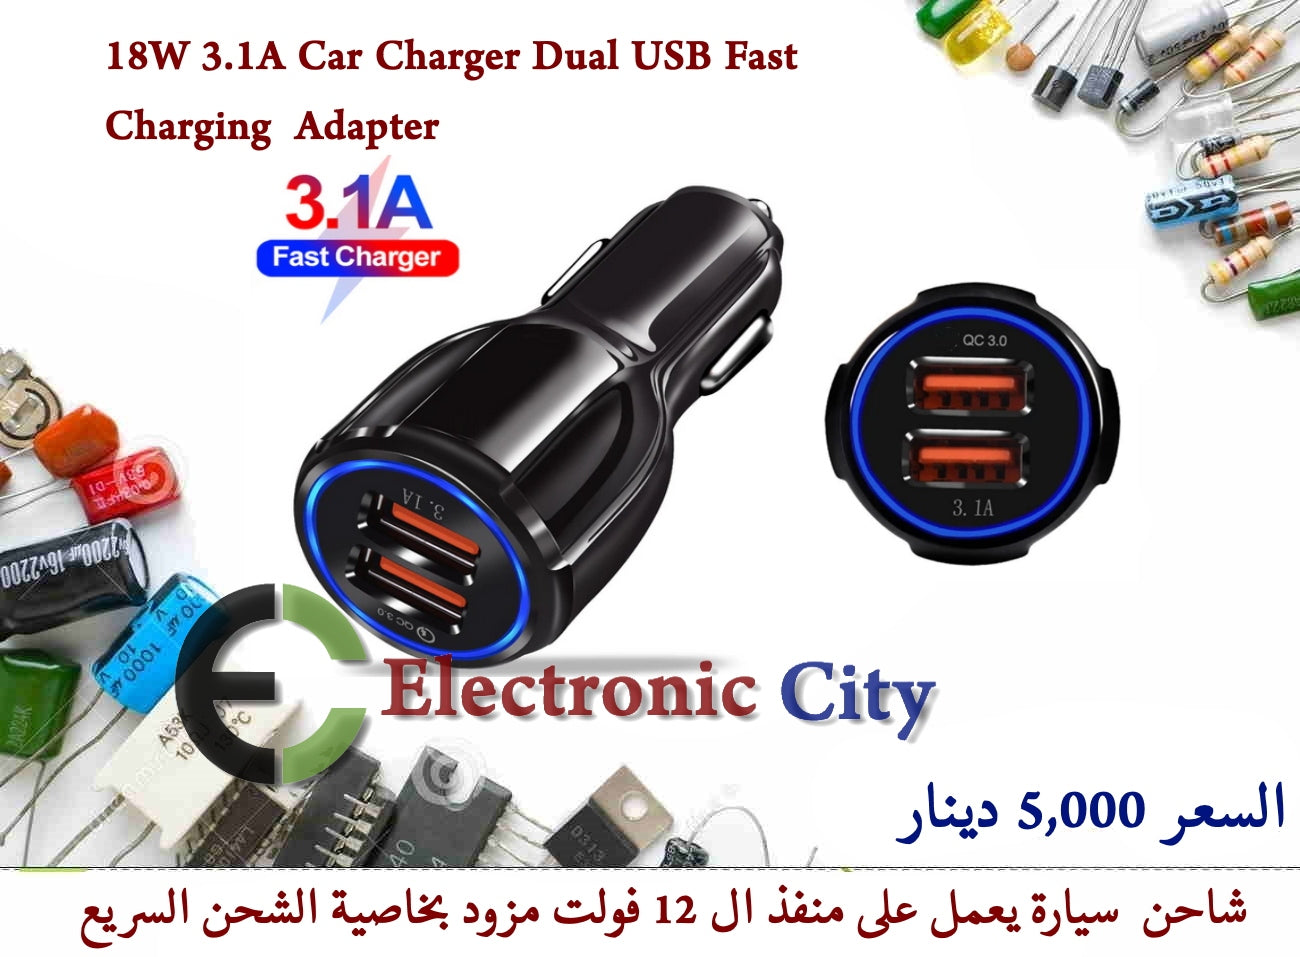 18W 3.1A Car Charger Dual USB Fast Charging  Adapter